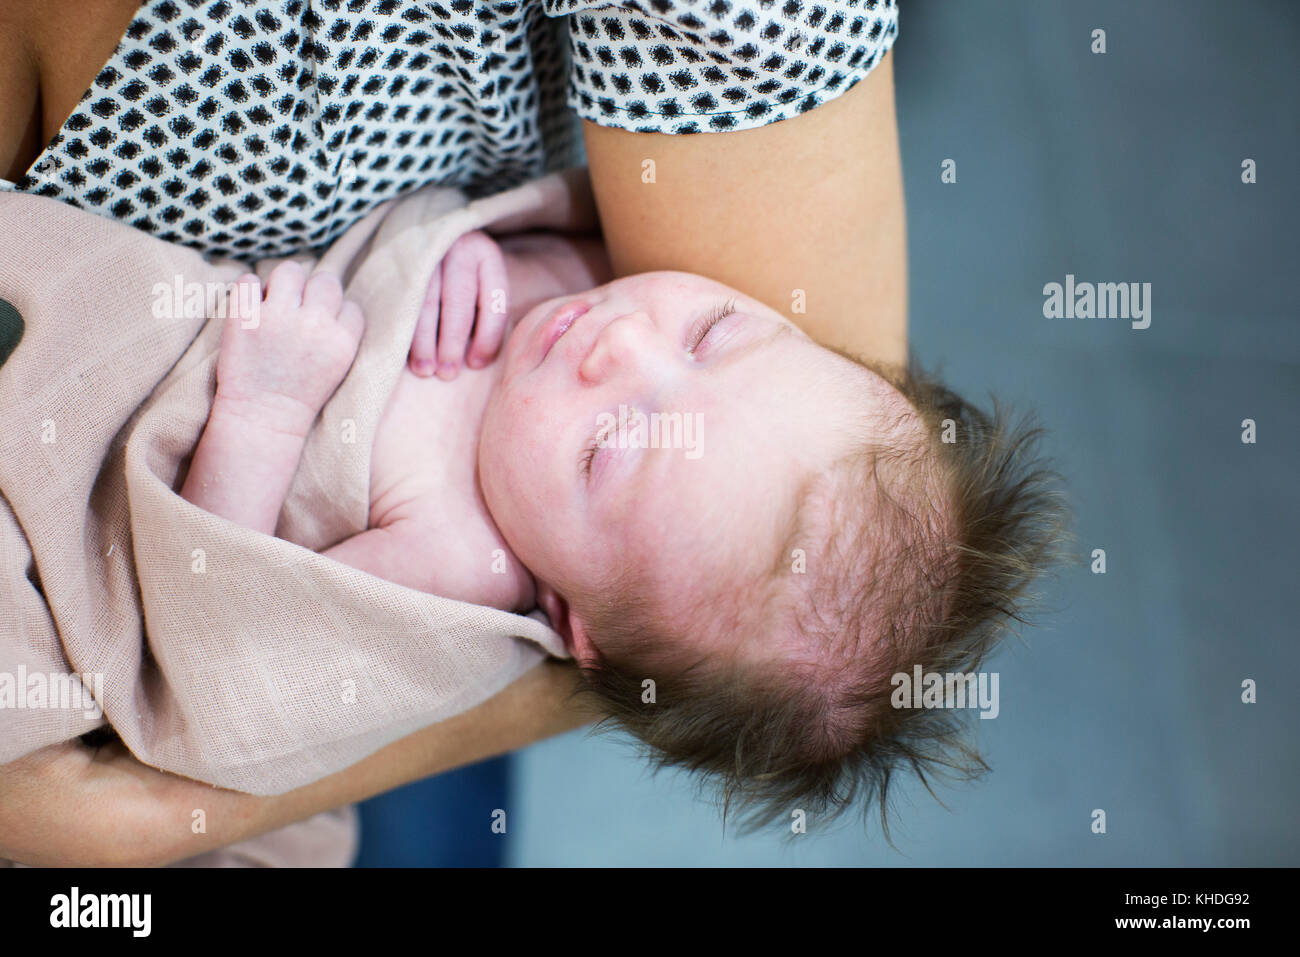 Mother holding new born baby Stock Photo